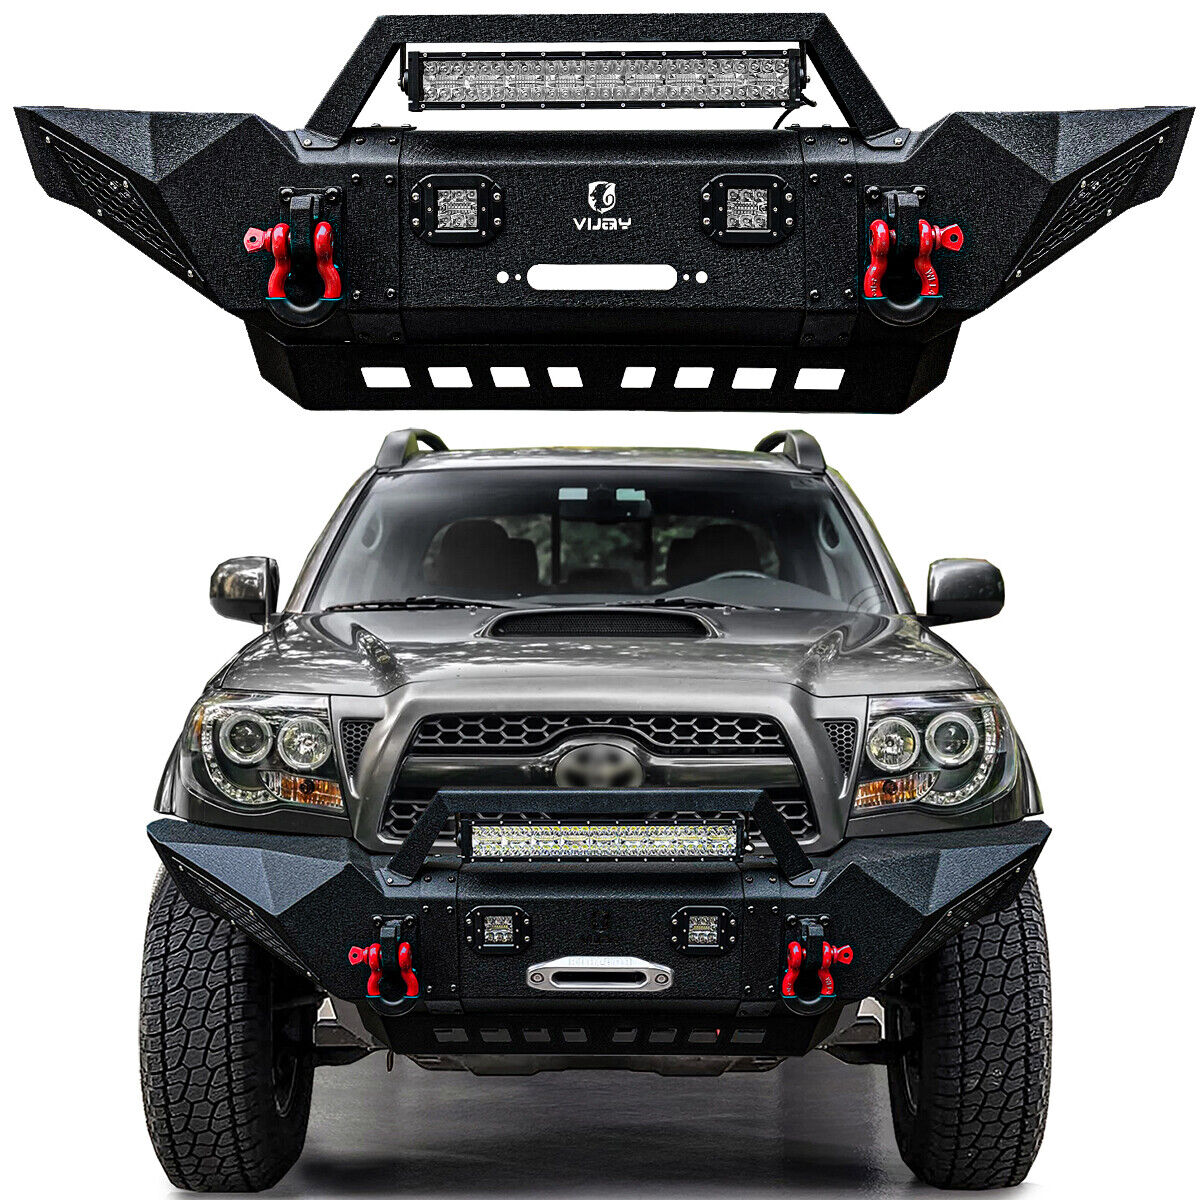 Tacoma Textured Black Front or Rear Bumper with LED Lights for 2005-2015 Tacoma